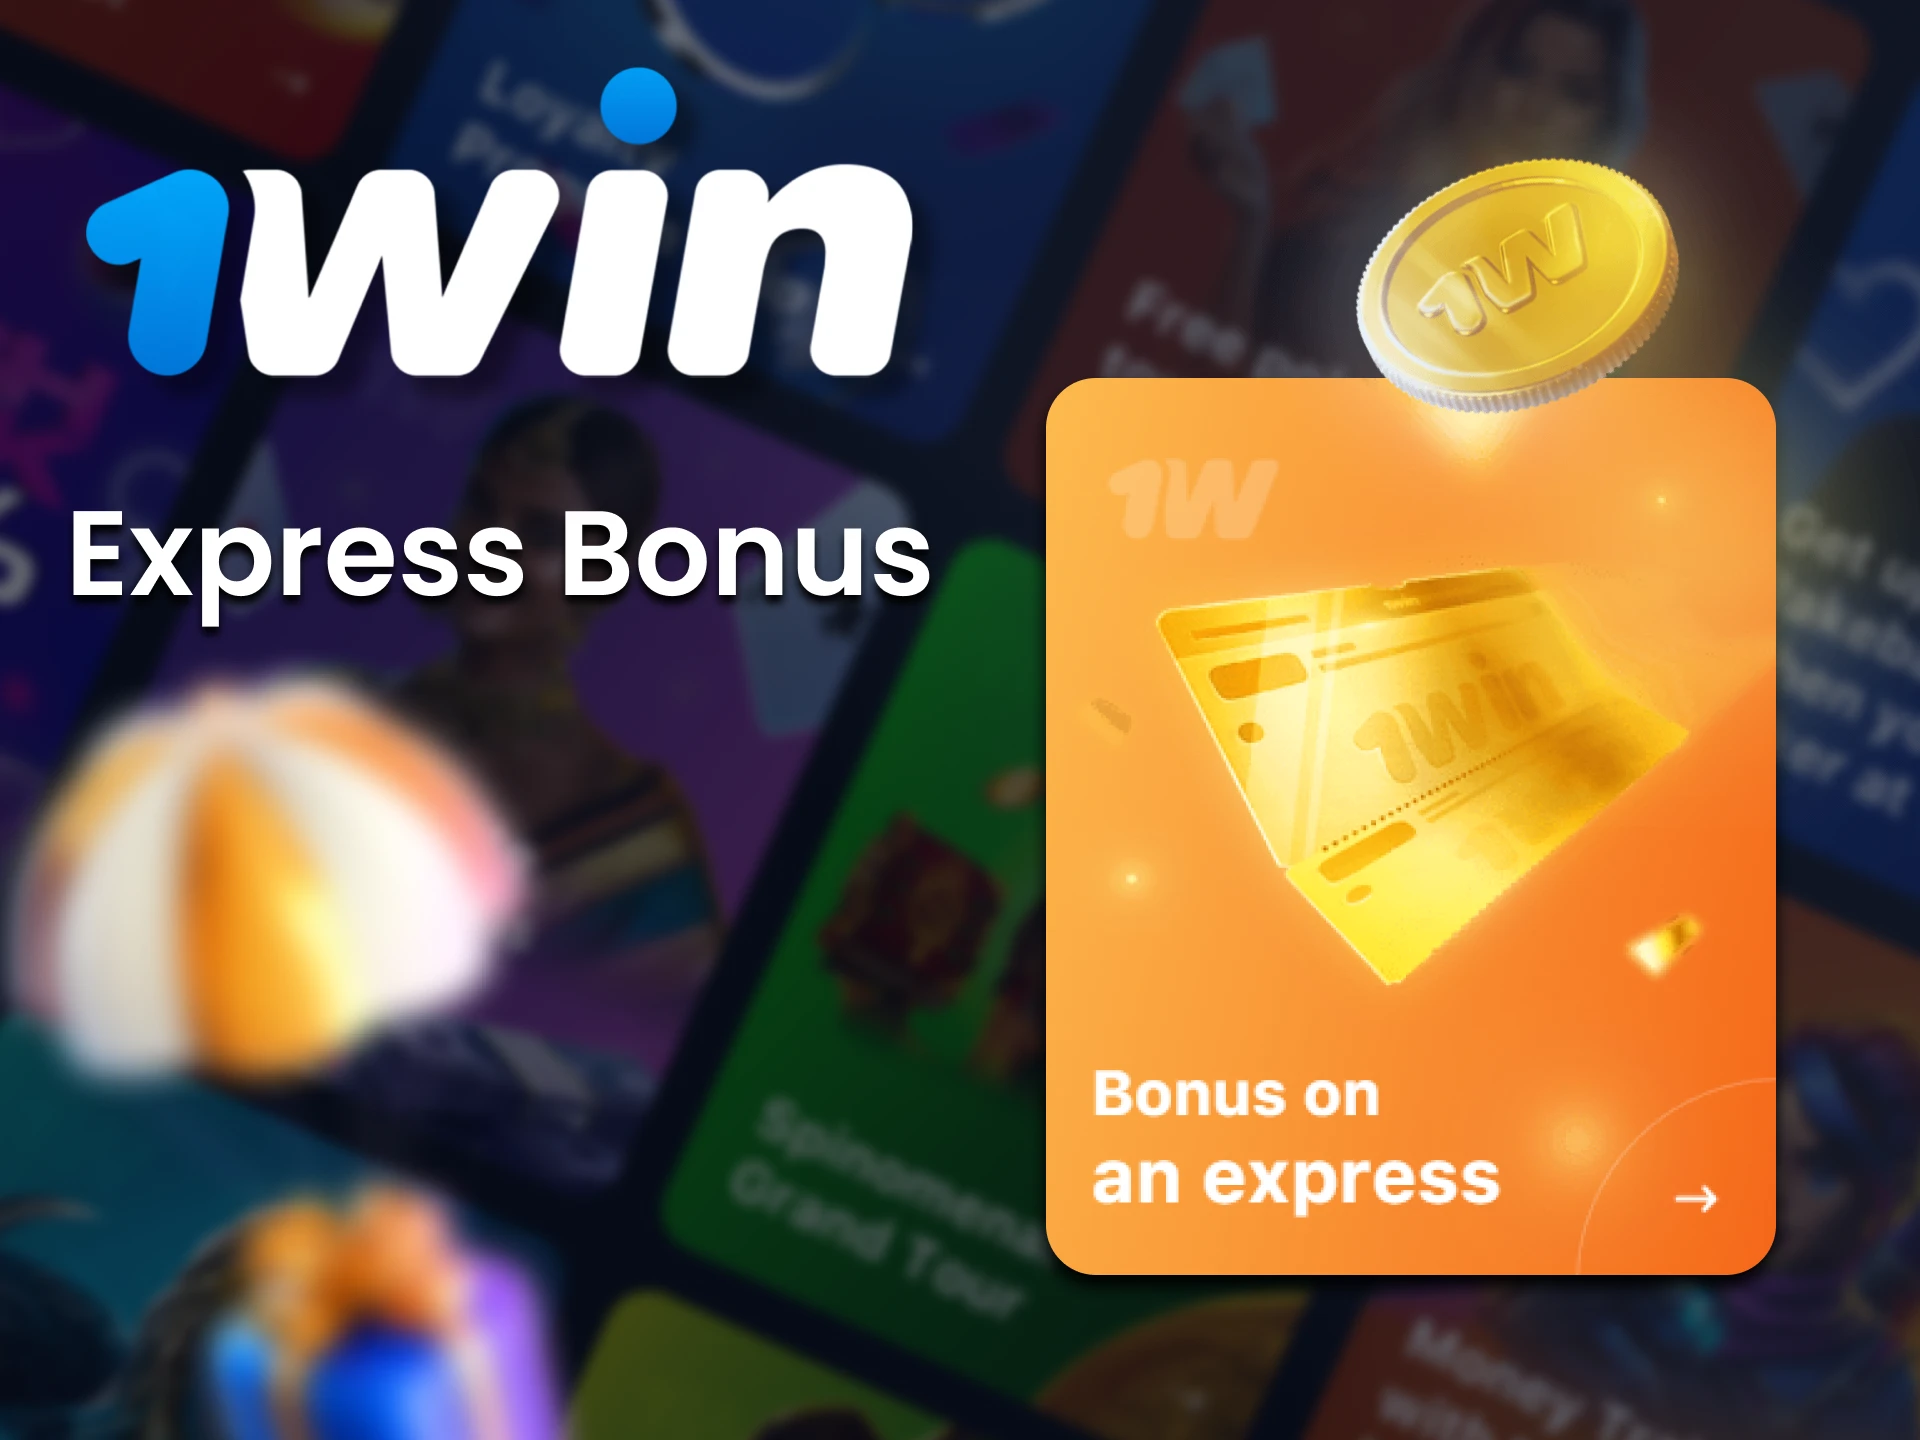 Get a special 1win bonus on an express for sports betting.